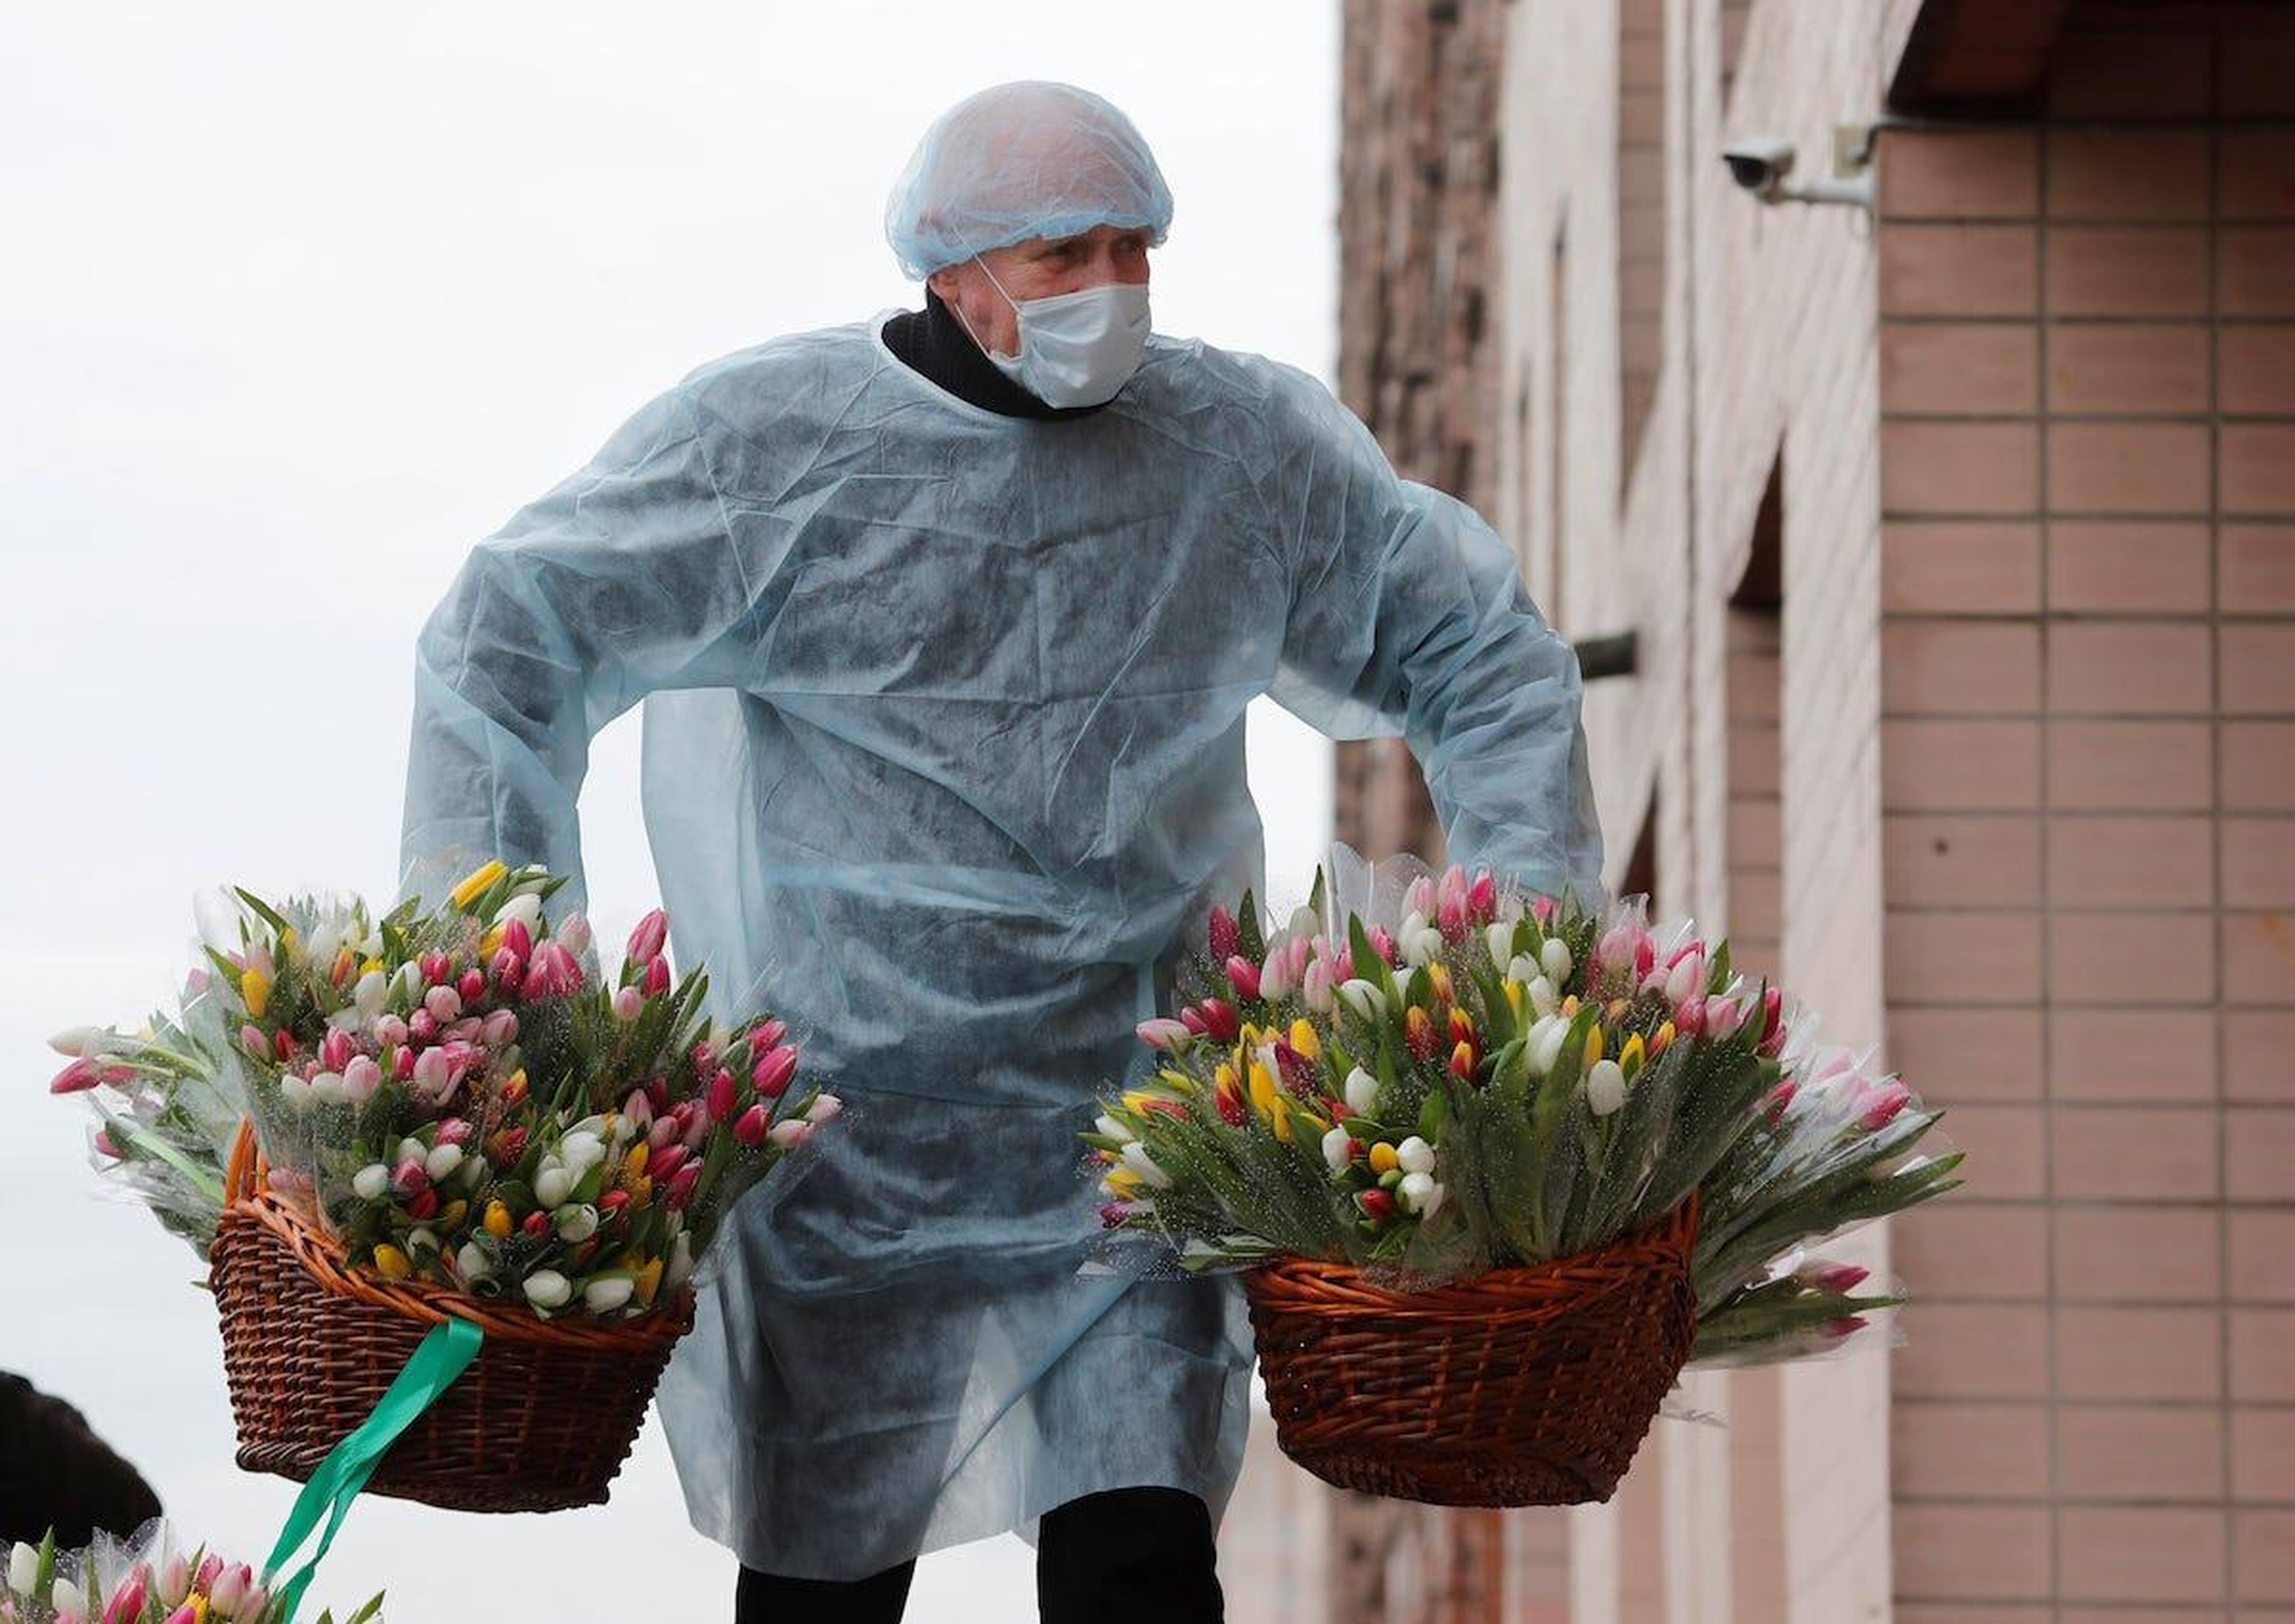 A man wearing a protective suit carries flowers for female students of the Mechnikov North-Western State Medical University in Saint Petersburg, Russia. The students are under quarantine at the dormitory as part of precautions